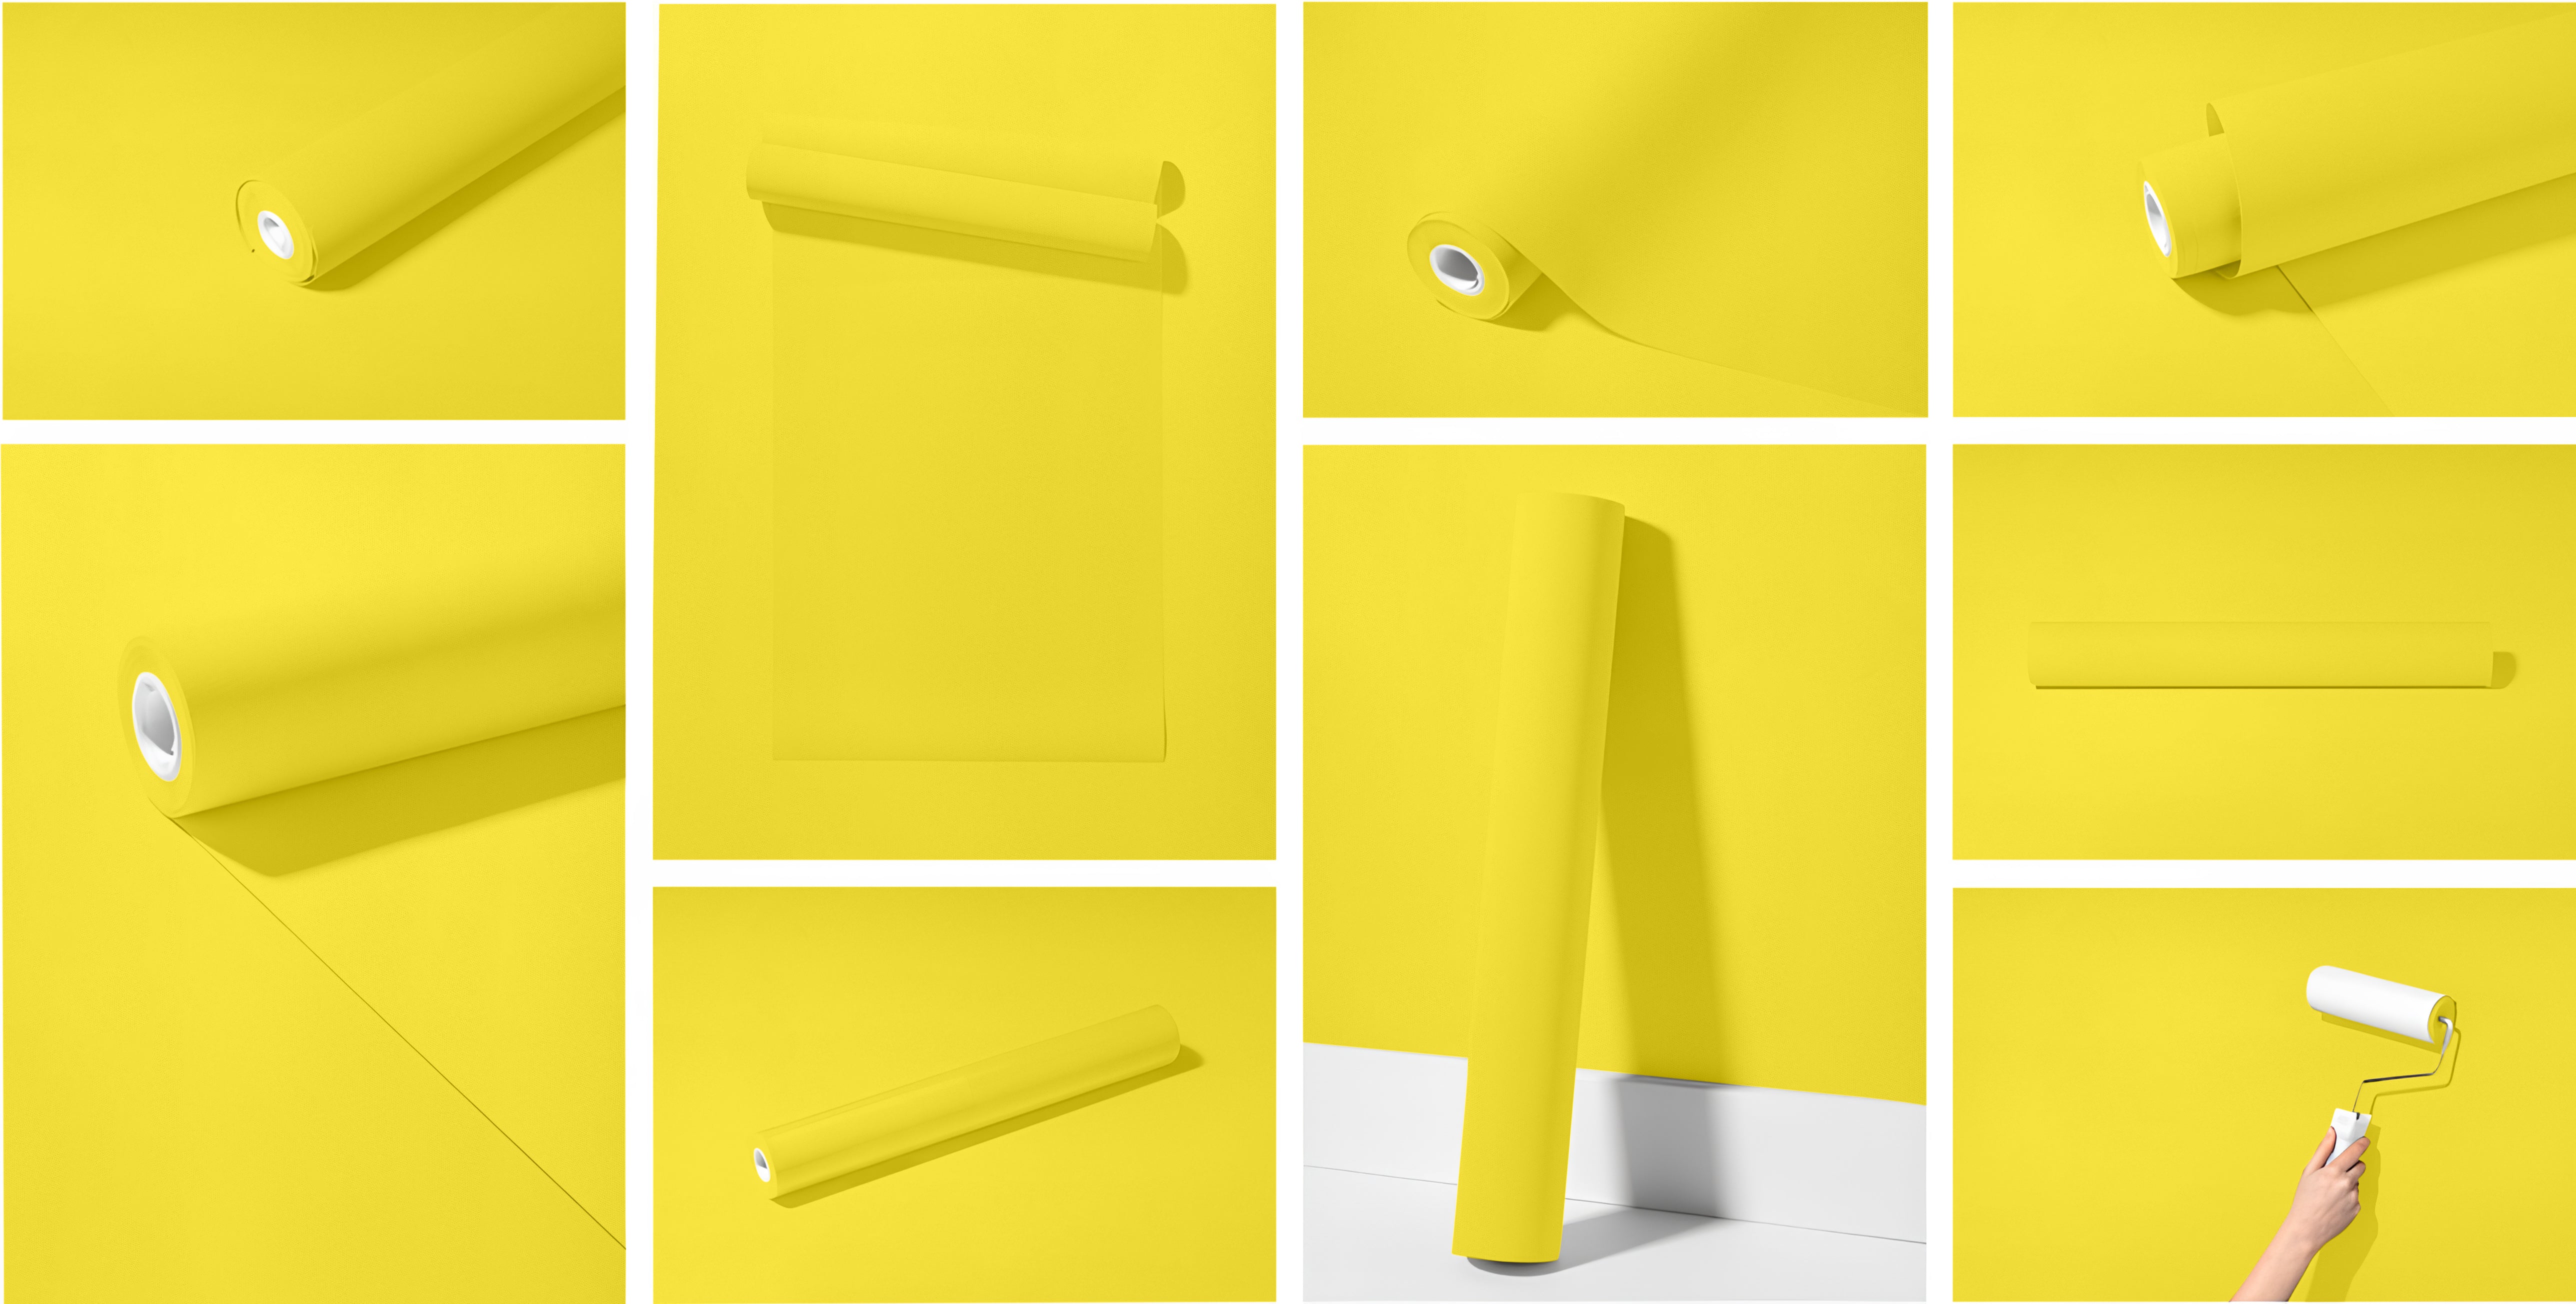 Peel & Stick Removable Re-usable Paint - Color RAL 1016 Sulfur Yellow - offRAL™ - RALRAW LLC, USA